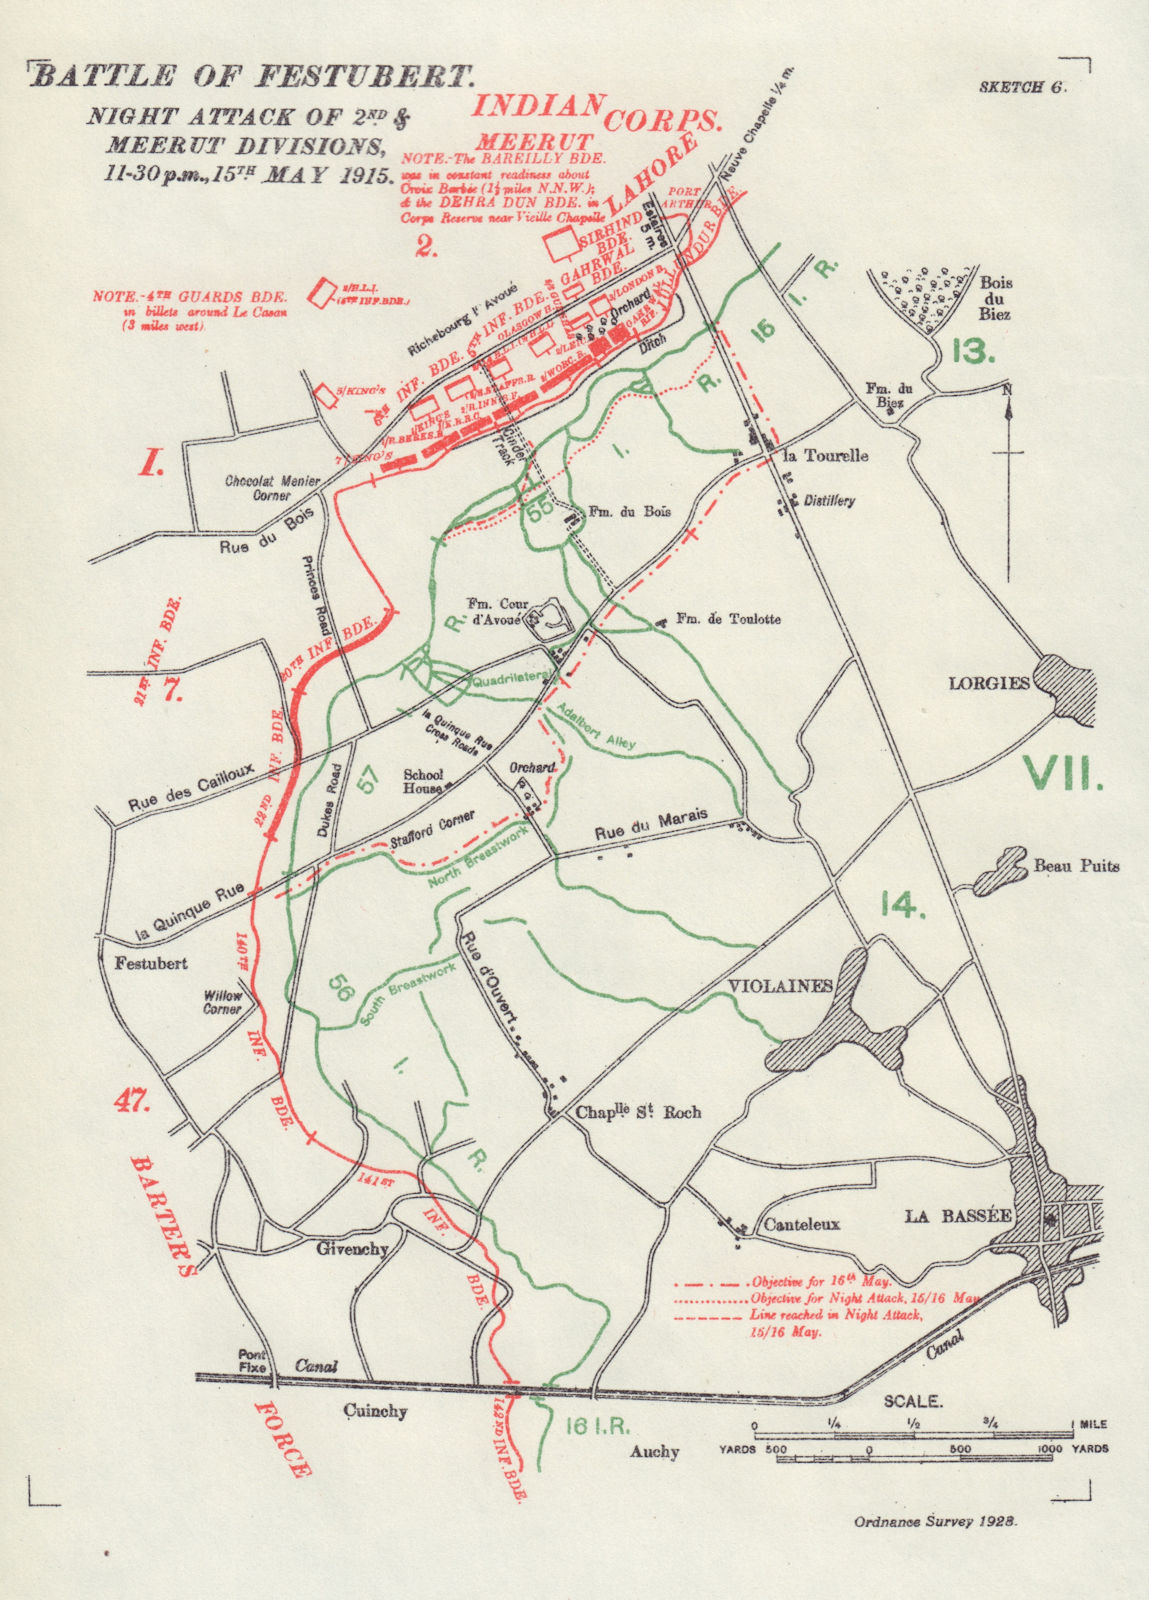 Battle of Festubert 11:30pm, 15th May 1915 night attack. WW1. Trenches 1928 map